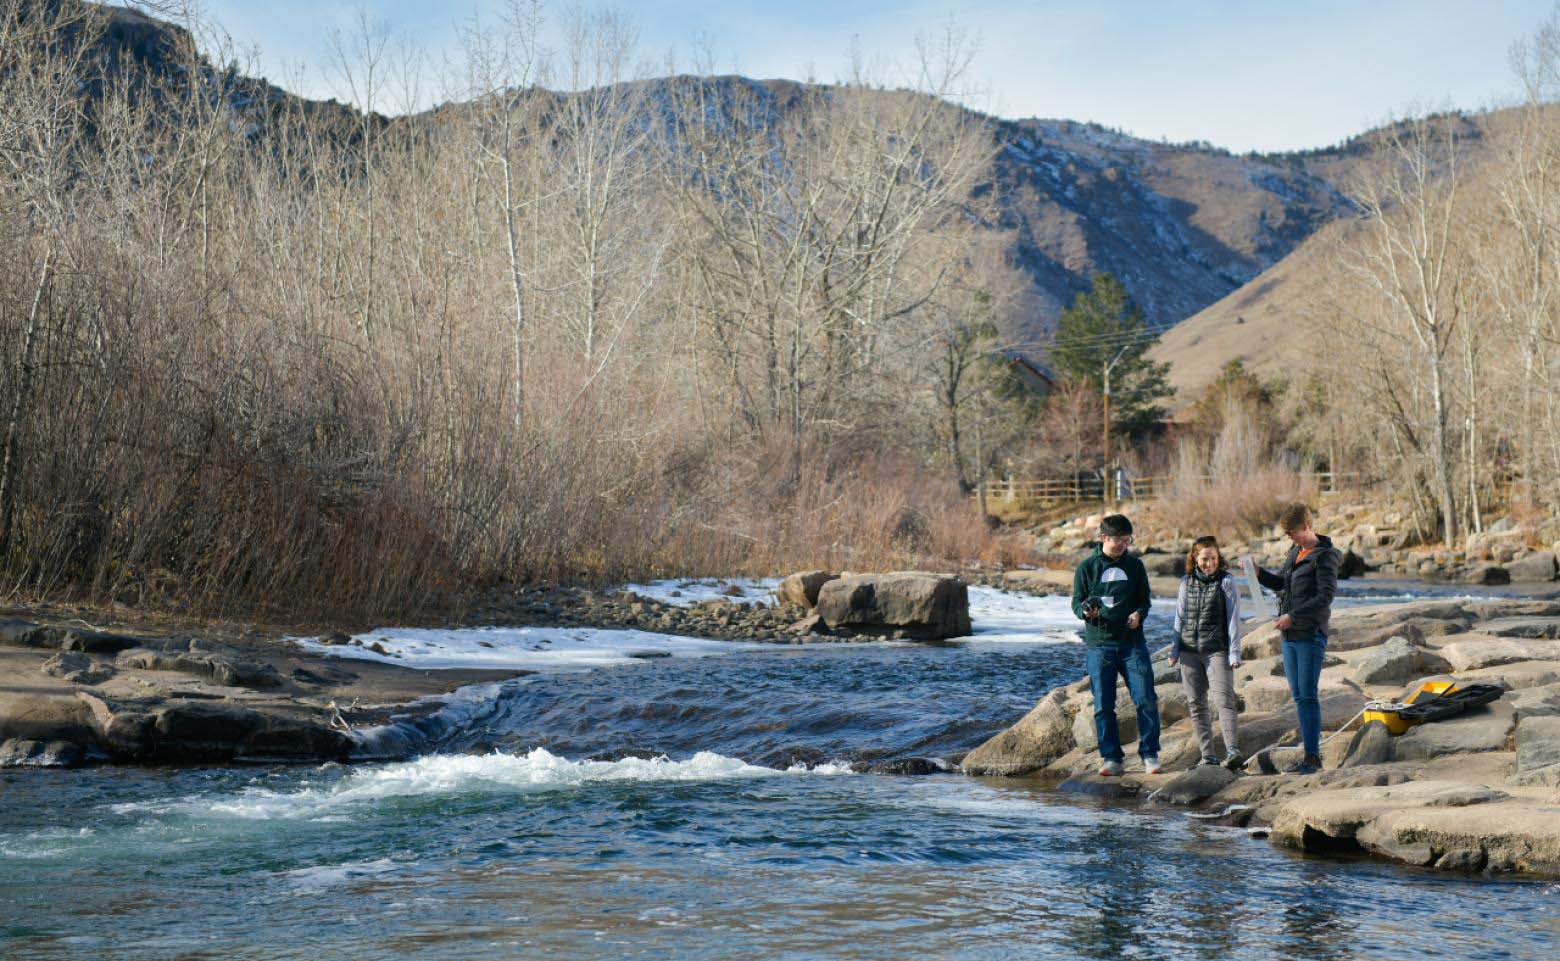 Postdoctoral researcher Jongeun You, PhD student Arielle Koshkin and Geology and Geological Engineering Assistant Professor Adrienne Marshall take measurements and test the water in Clear Creek.